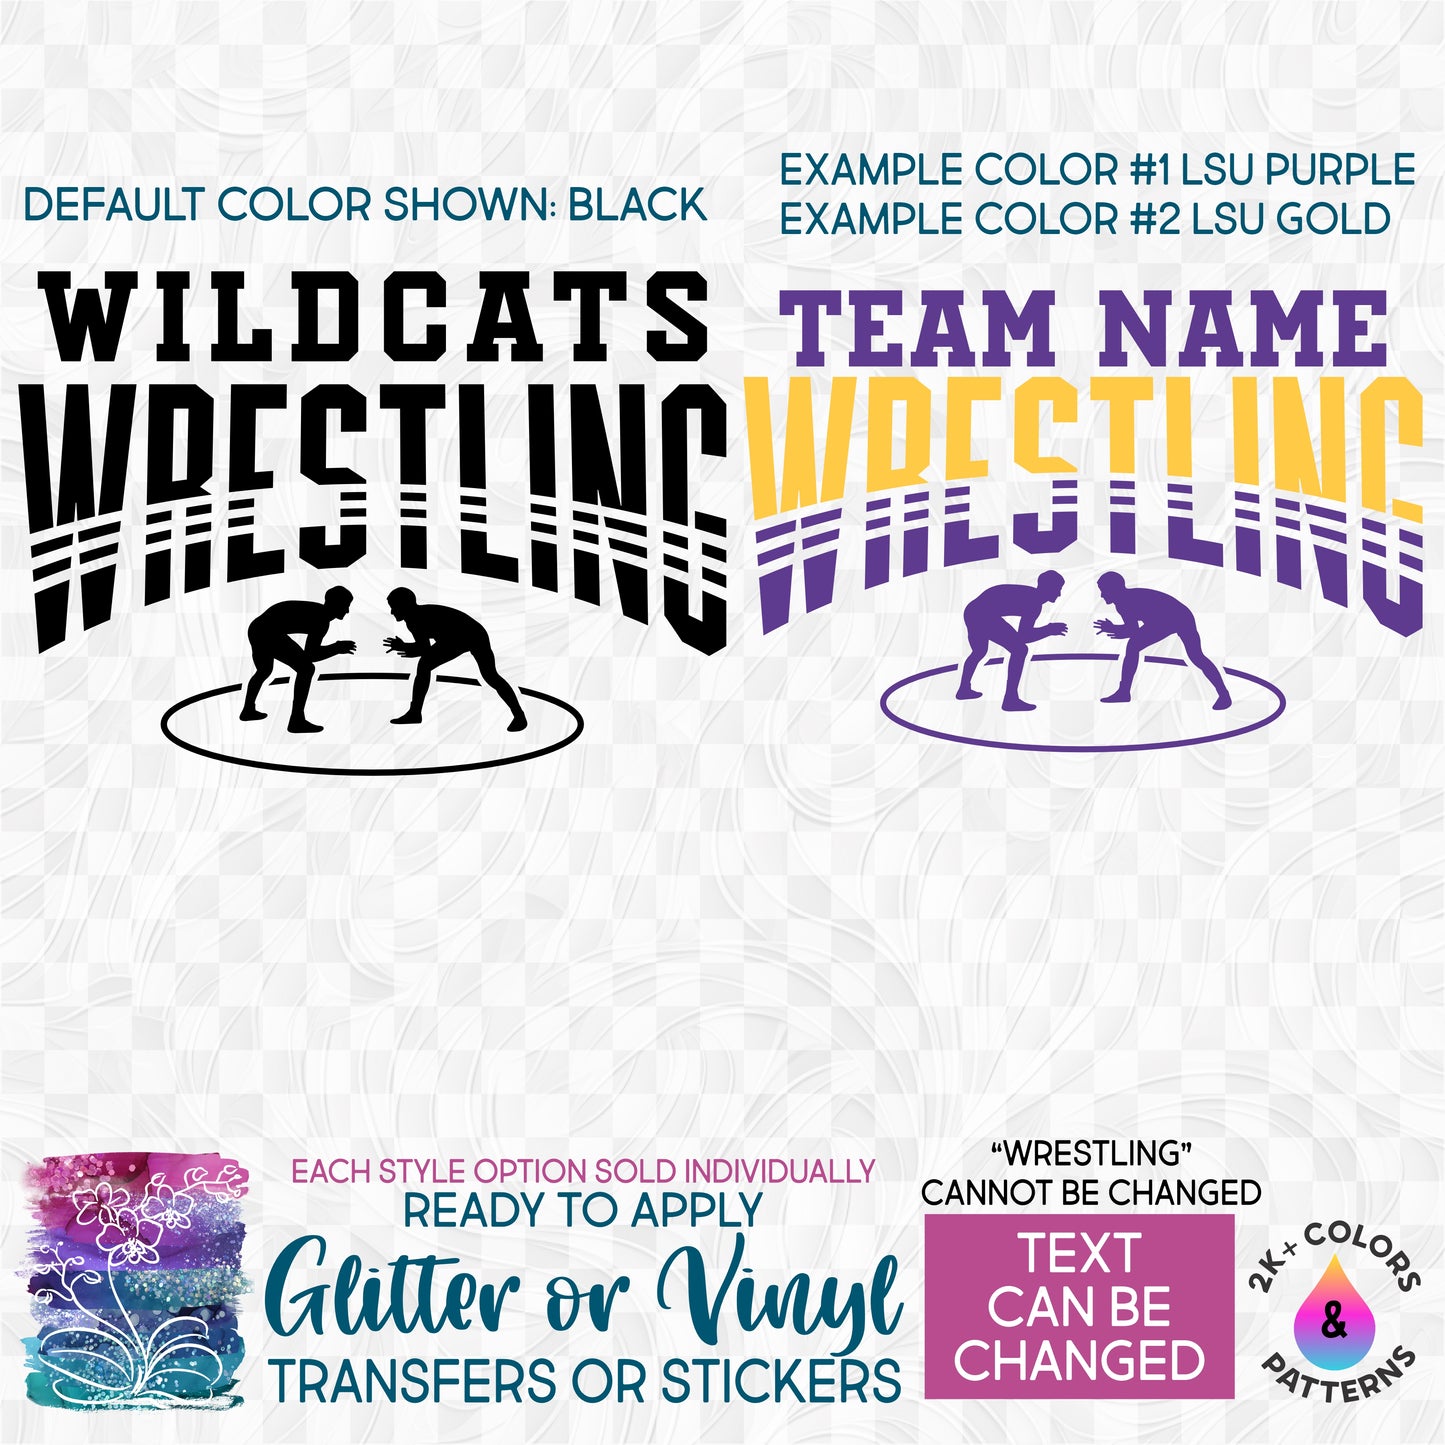 s414-8A Wrestling Wrestlers Team Name Wildcats Bears Eagles Panthers Bulldogs Yellow Jackets Custom Printed Iron On Transfer or Sticker